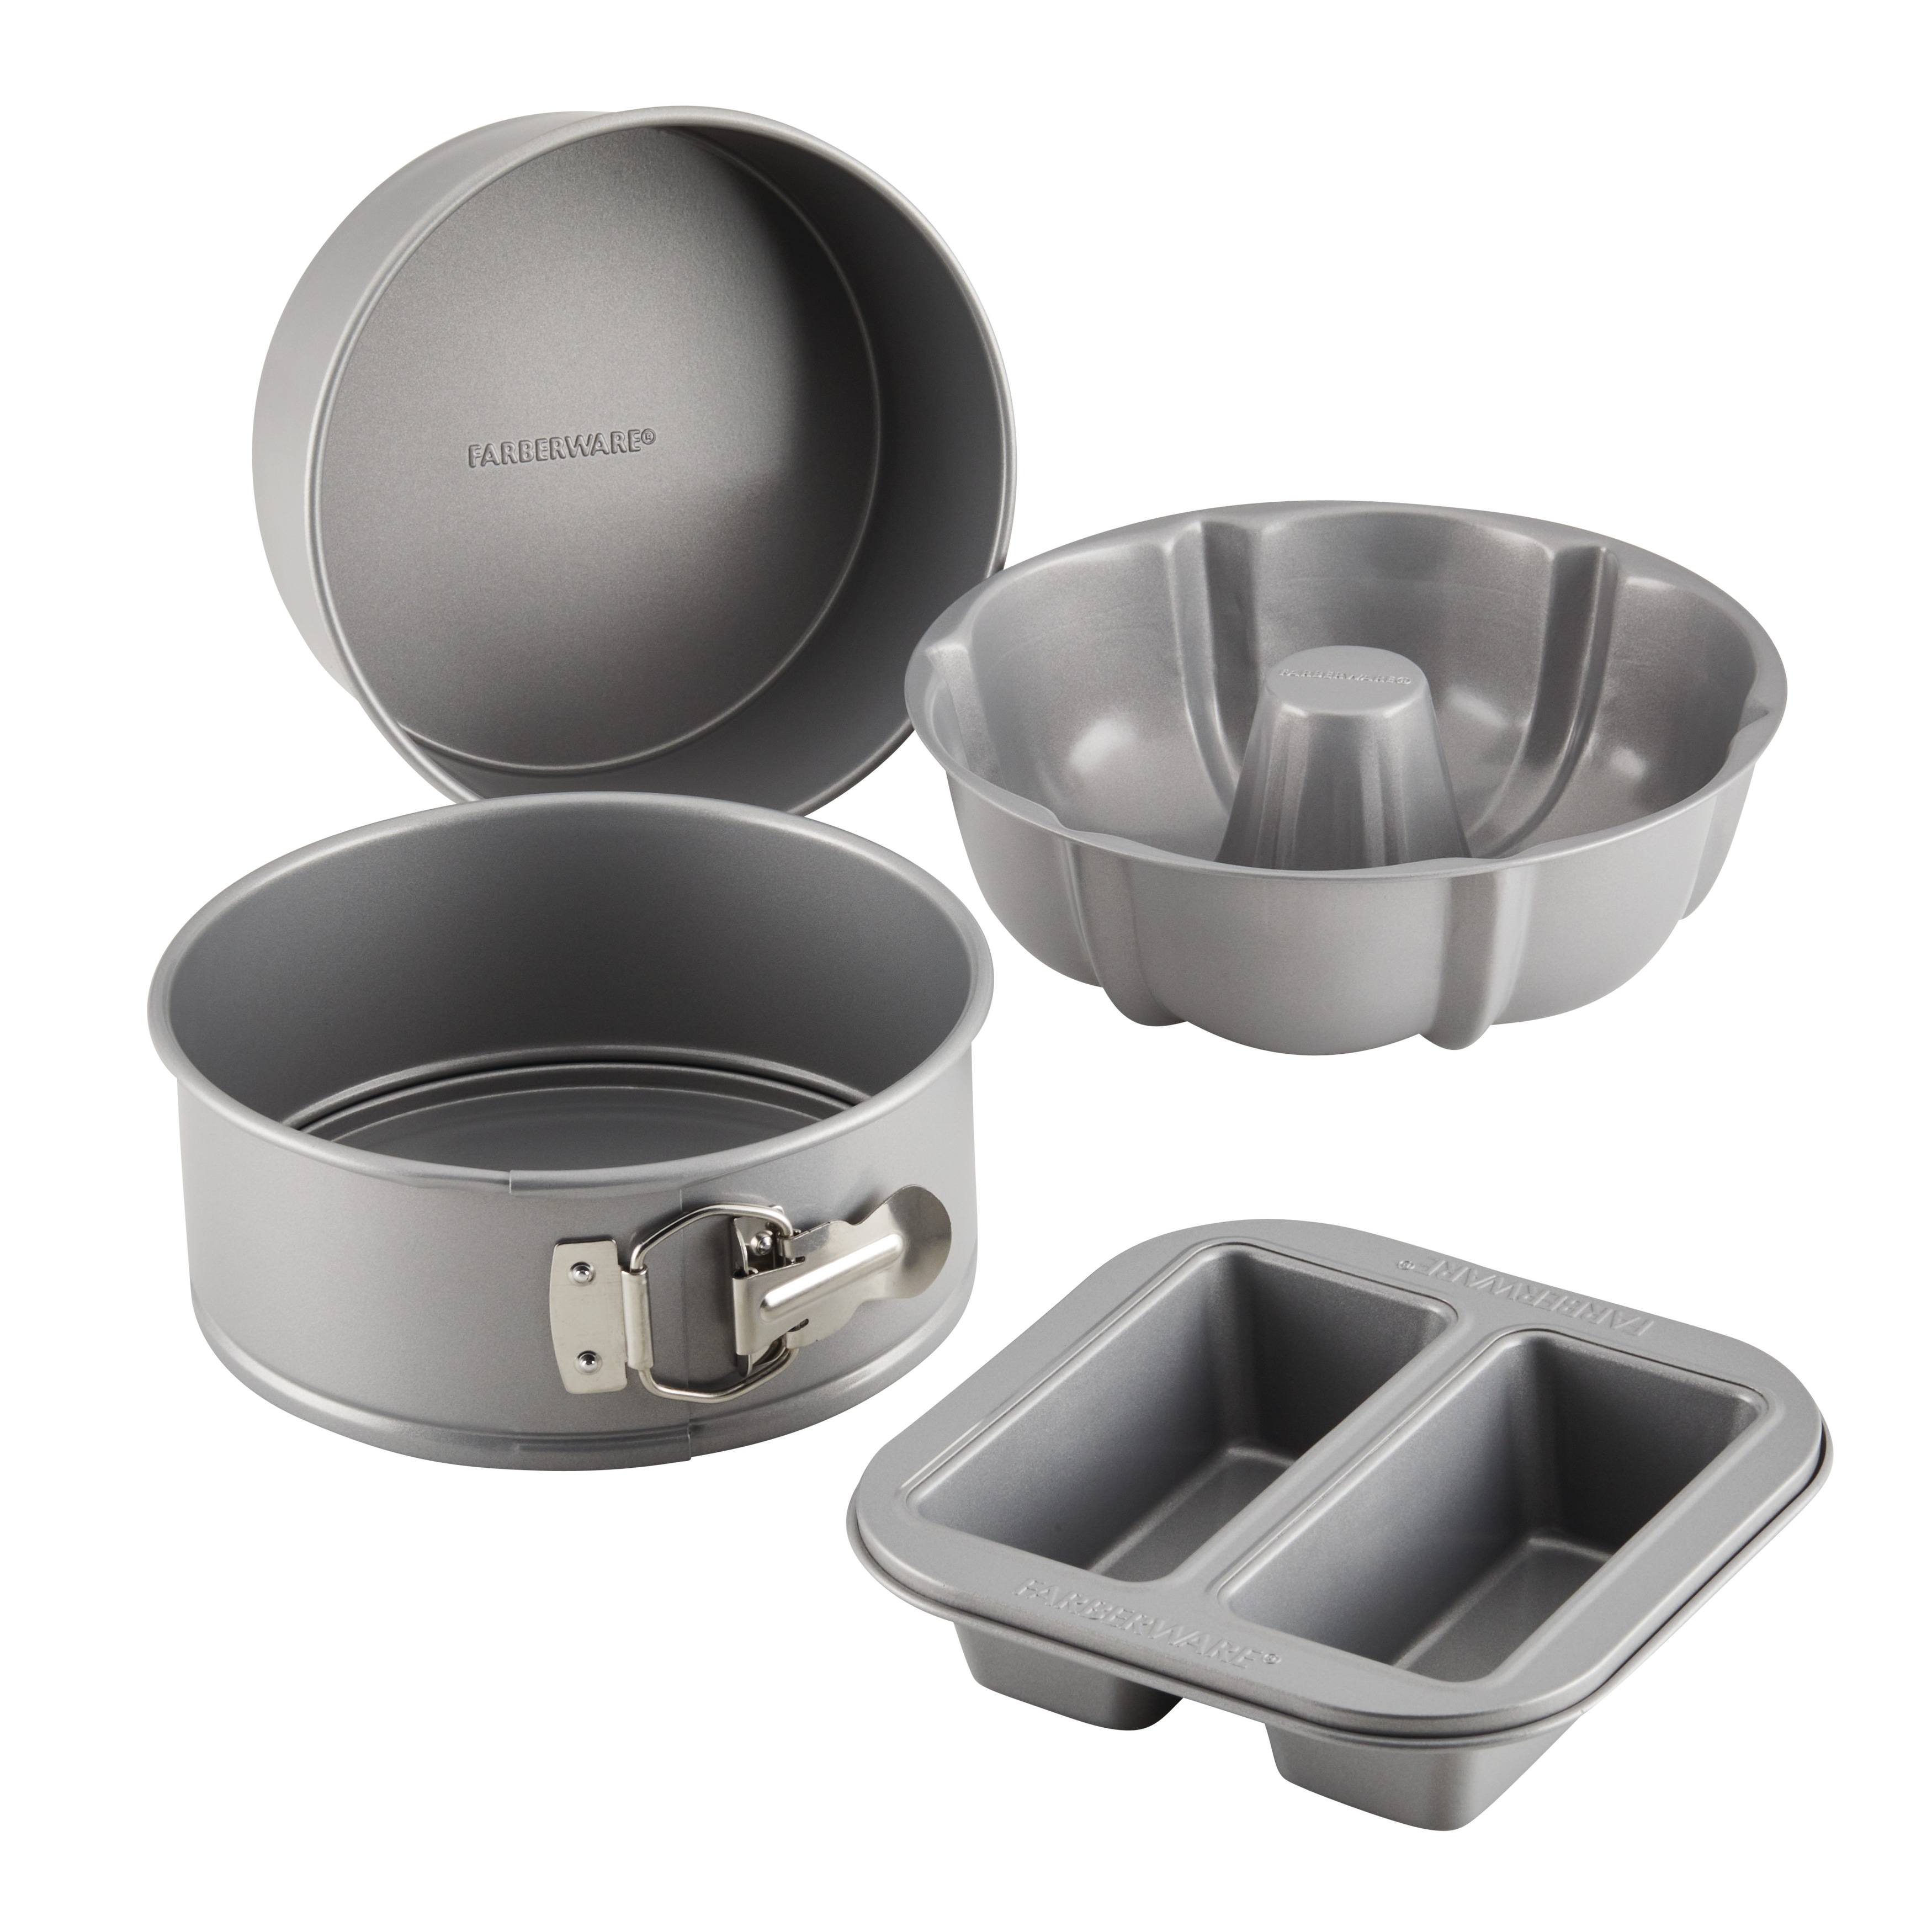 https://ak1.ostkcdn.com/images/products/is/images/direct/a2cb222f7e573f2d020b4d0fd5349cecd94c6ddb/Farberware-Specialty-Bakeware-Nonstick-Pressure-Cookware-Bakeware-Set%2C-4-Piece%2C-Gray.jpg